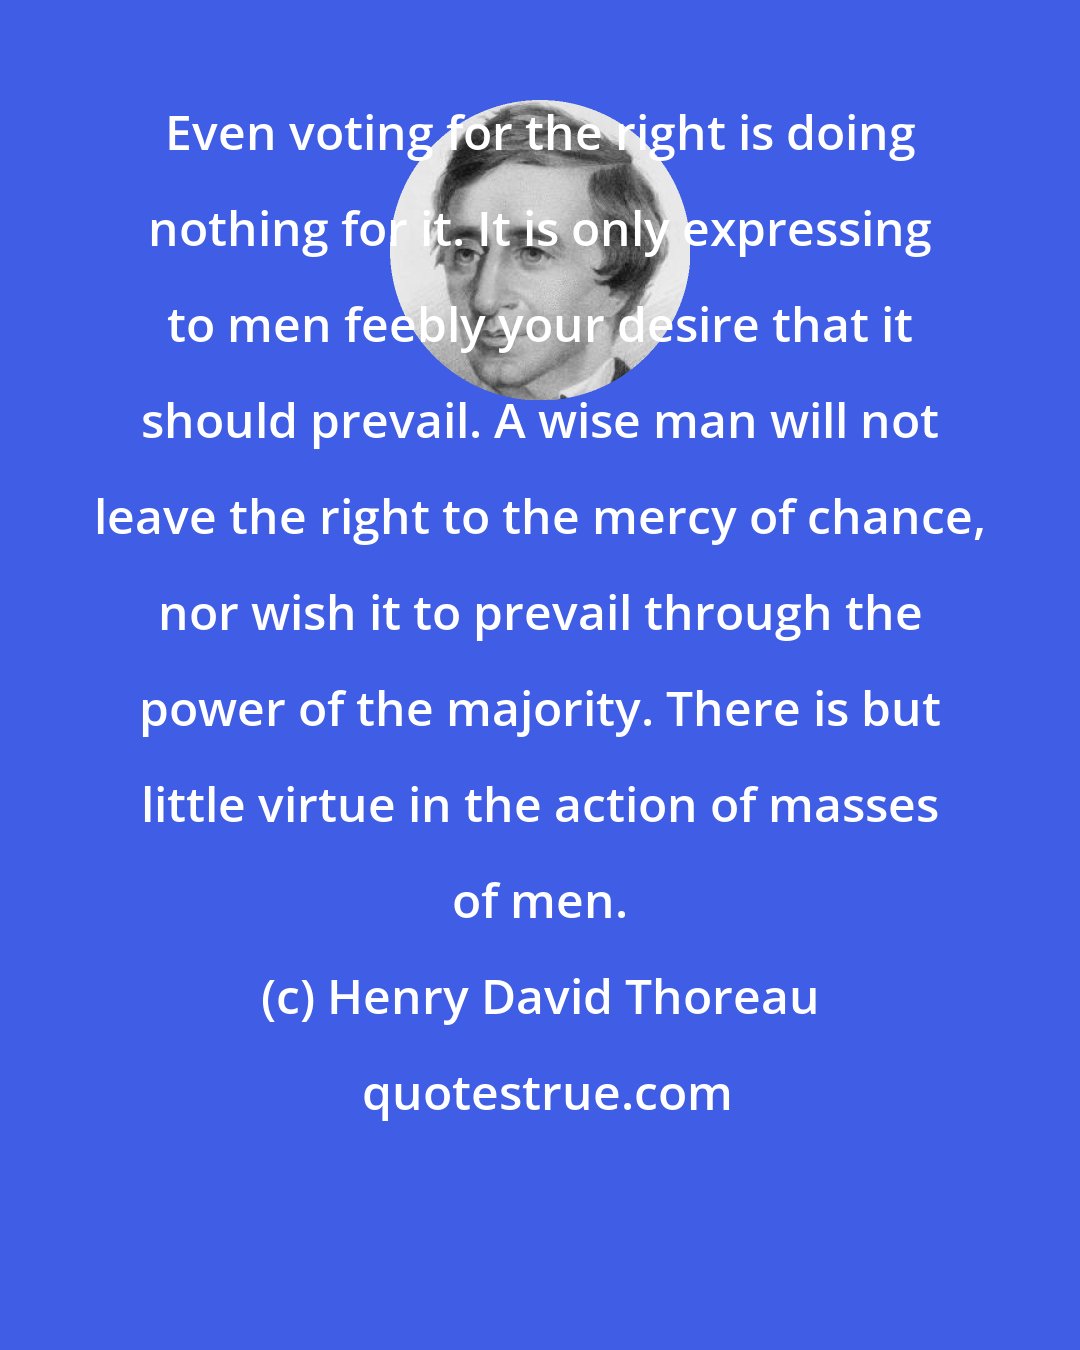 Henry David Thoreau: Even voting for the right is doing nothing for it. It is only expressing to men feebly your desire that it should prevail. A wise man will not leave the right to the mercy of chance, nor wish it to prevail through the power of the majority. There is but little virtue in the action of masses of men.